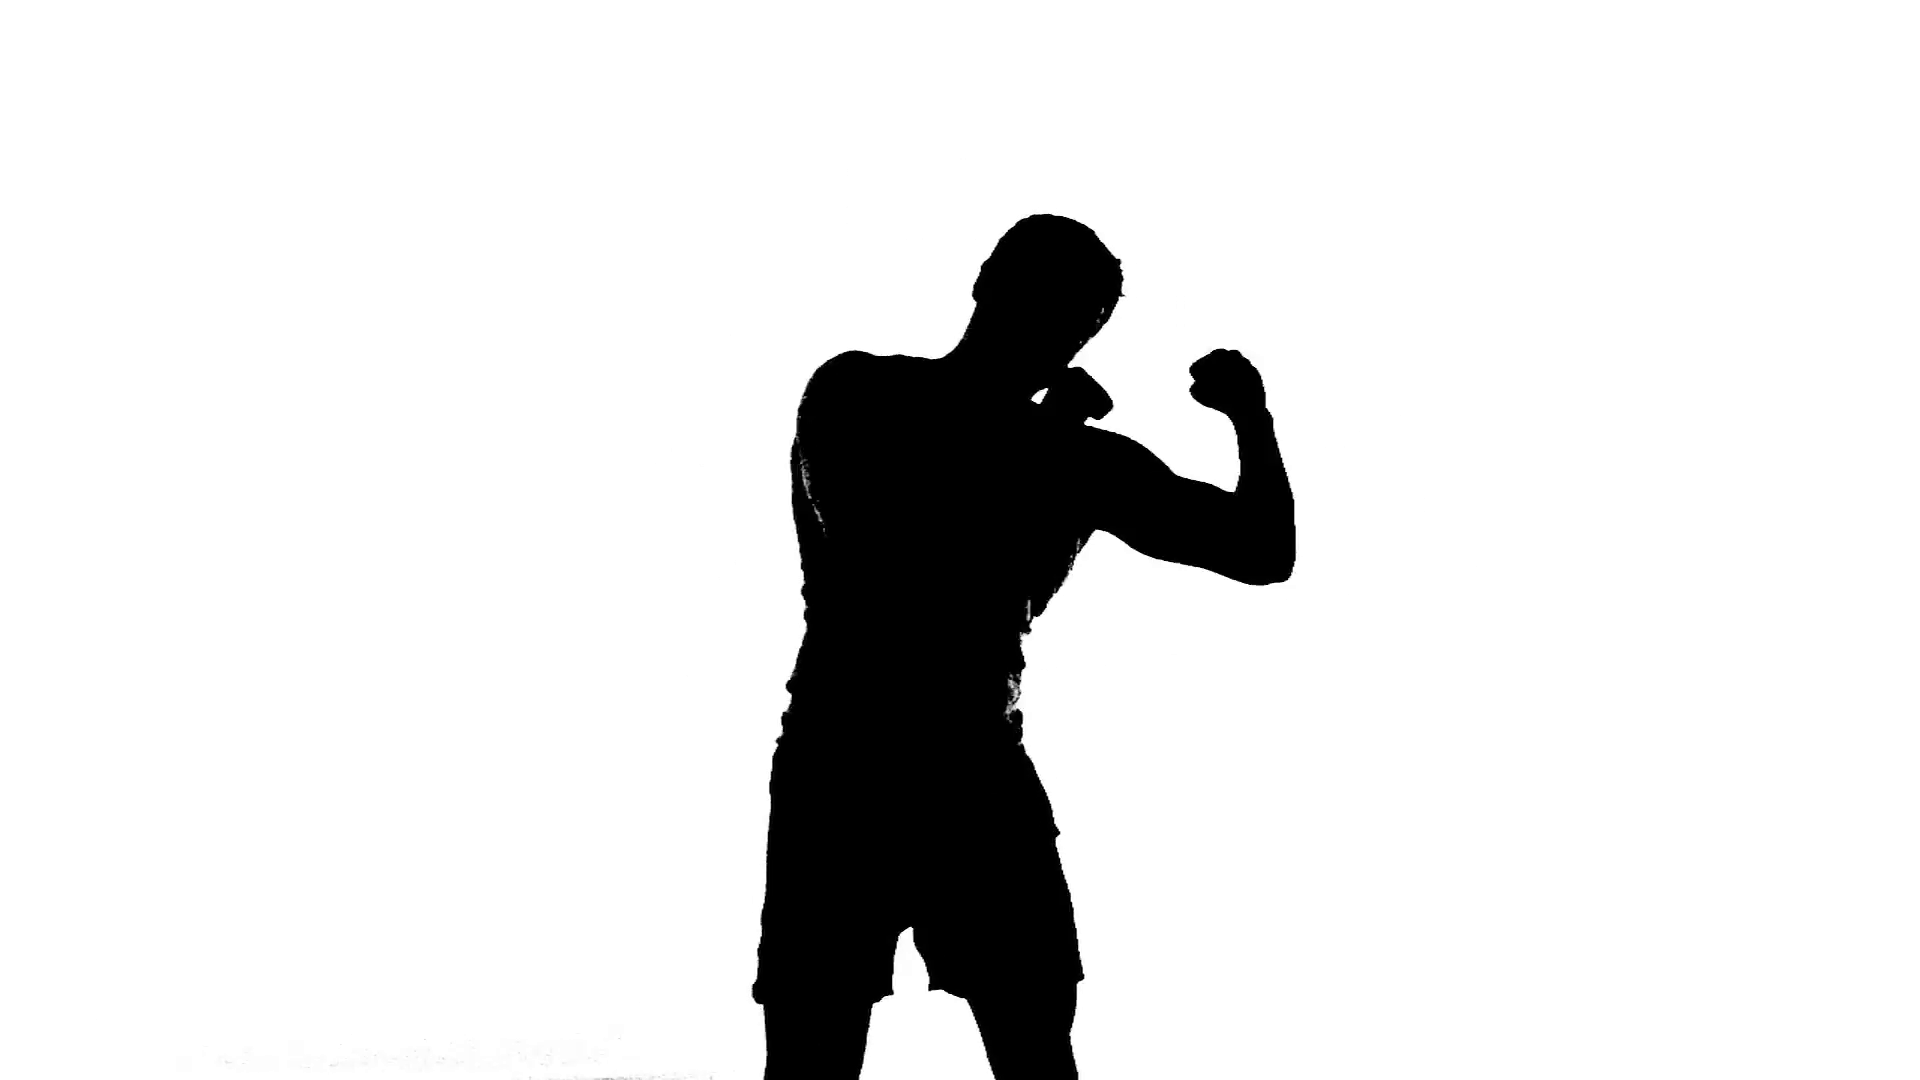 Silhouette of Man Boxing Bare Fisted - Boxer Fighter throwing ...